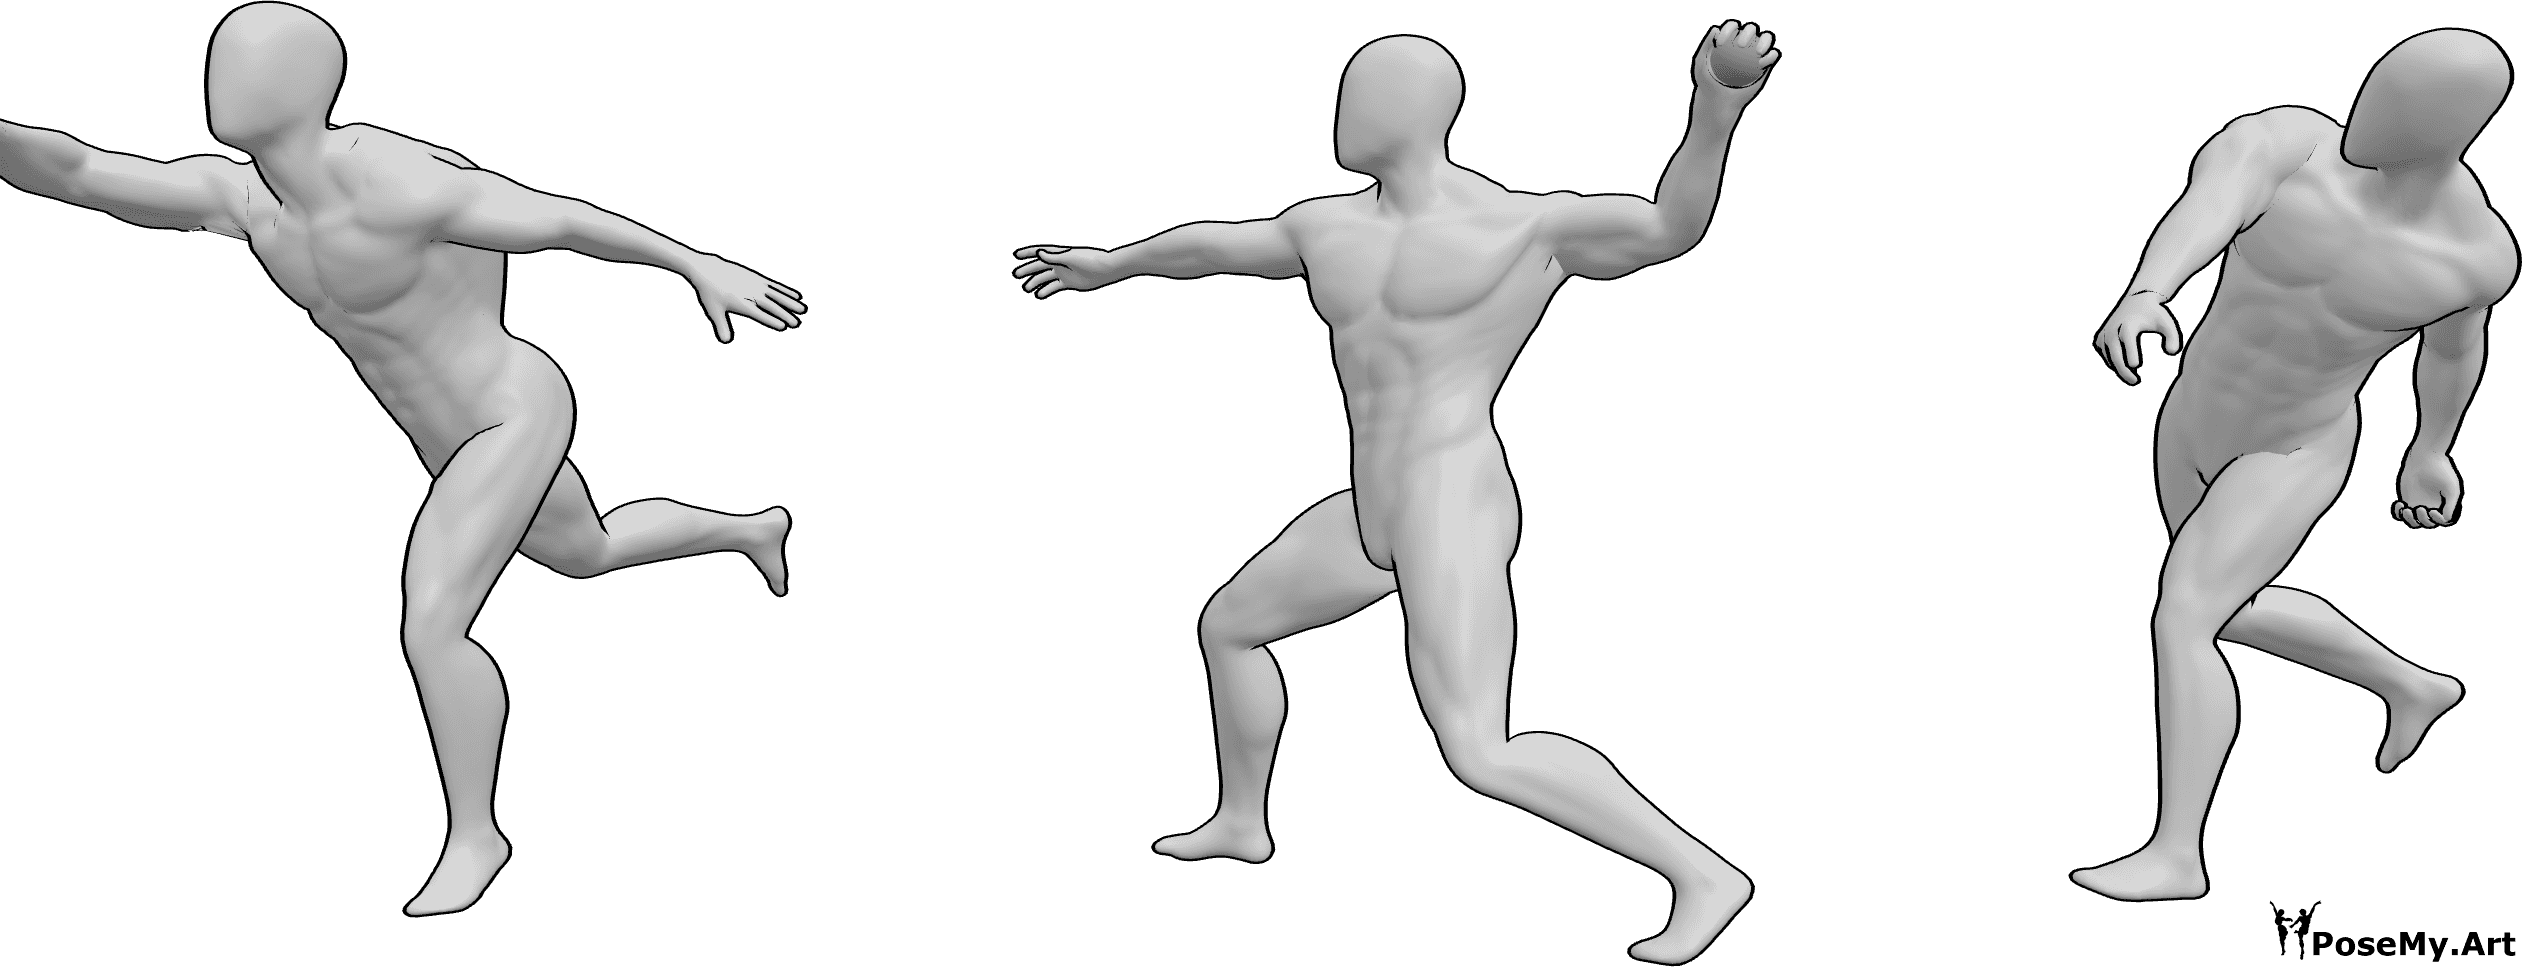 Pose Reference - Throwing Positions - Three realistic men models in different throwing positions